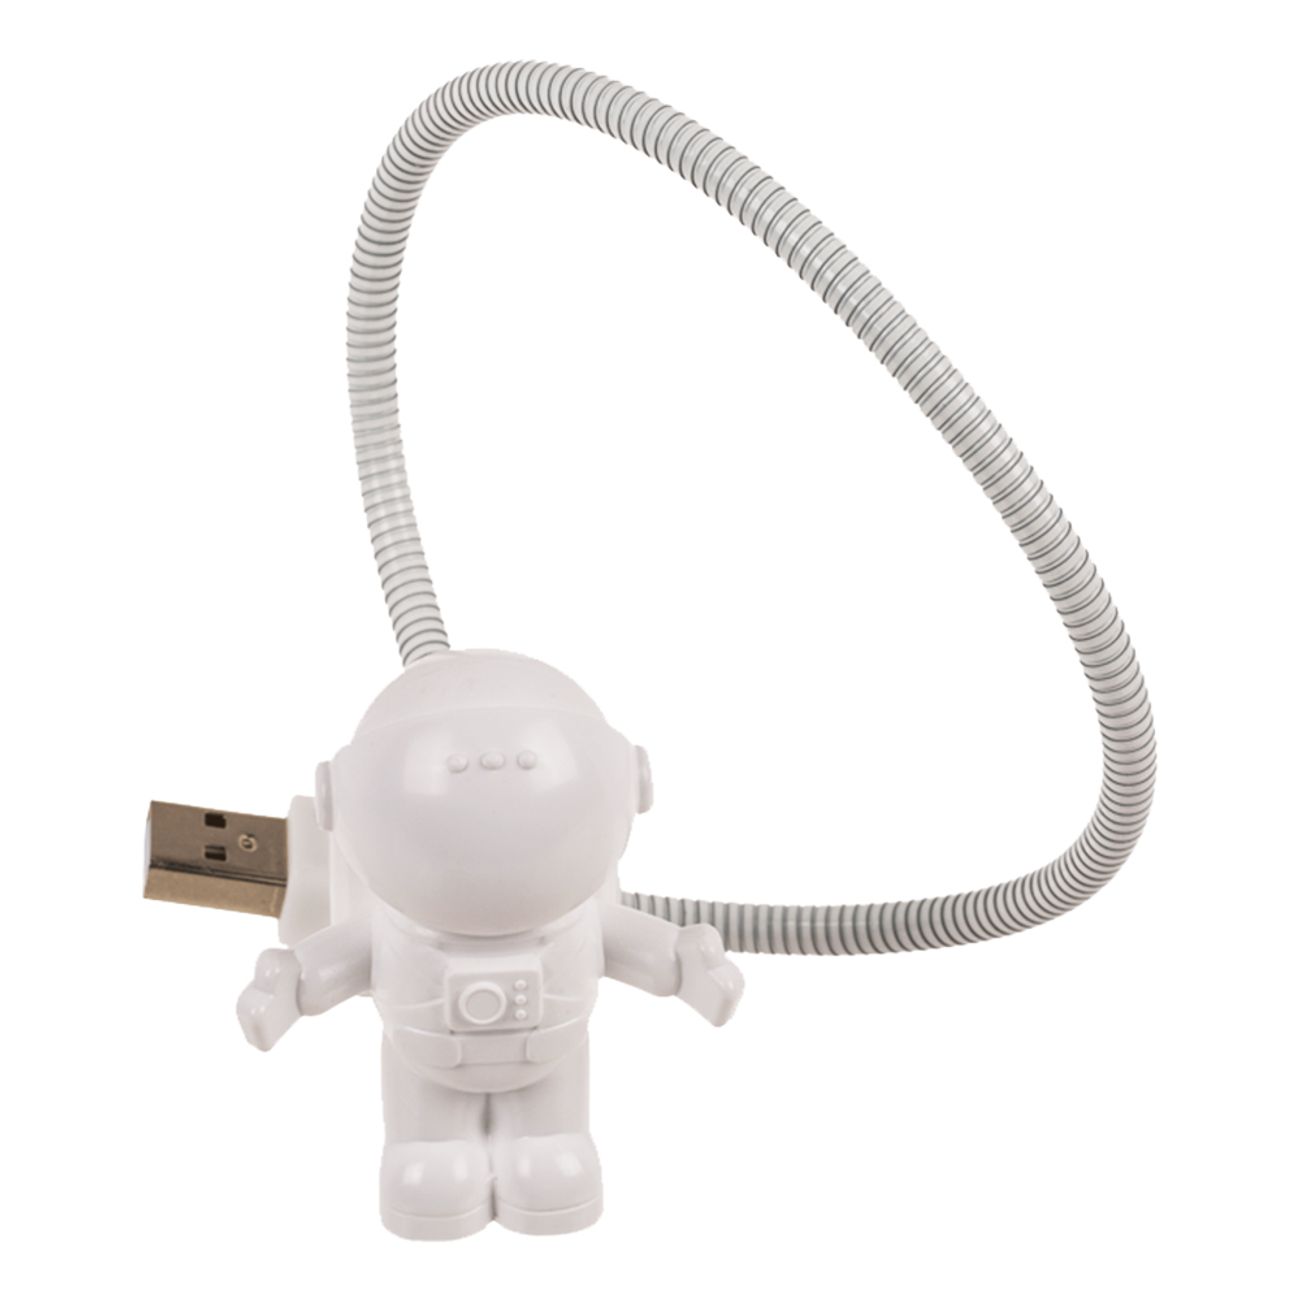 usb-led-astronaut-ca-7-x-335-cm-with-usb-cable--in-gift-box-100136-3